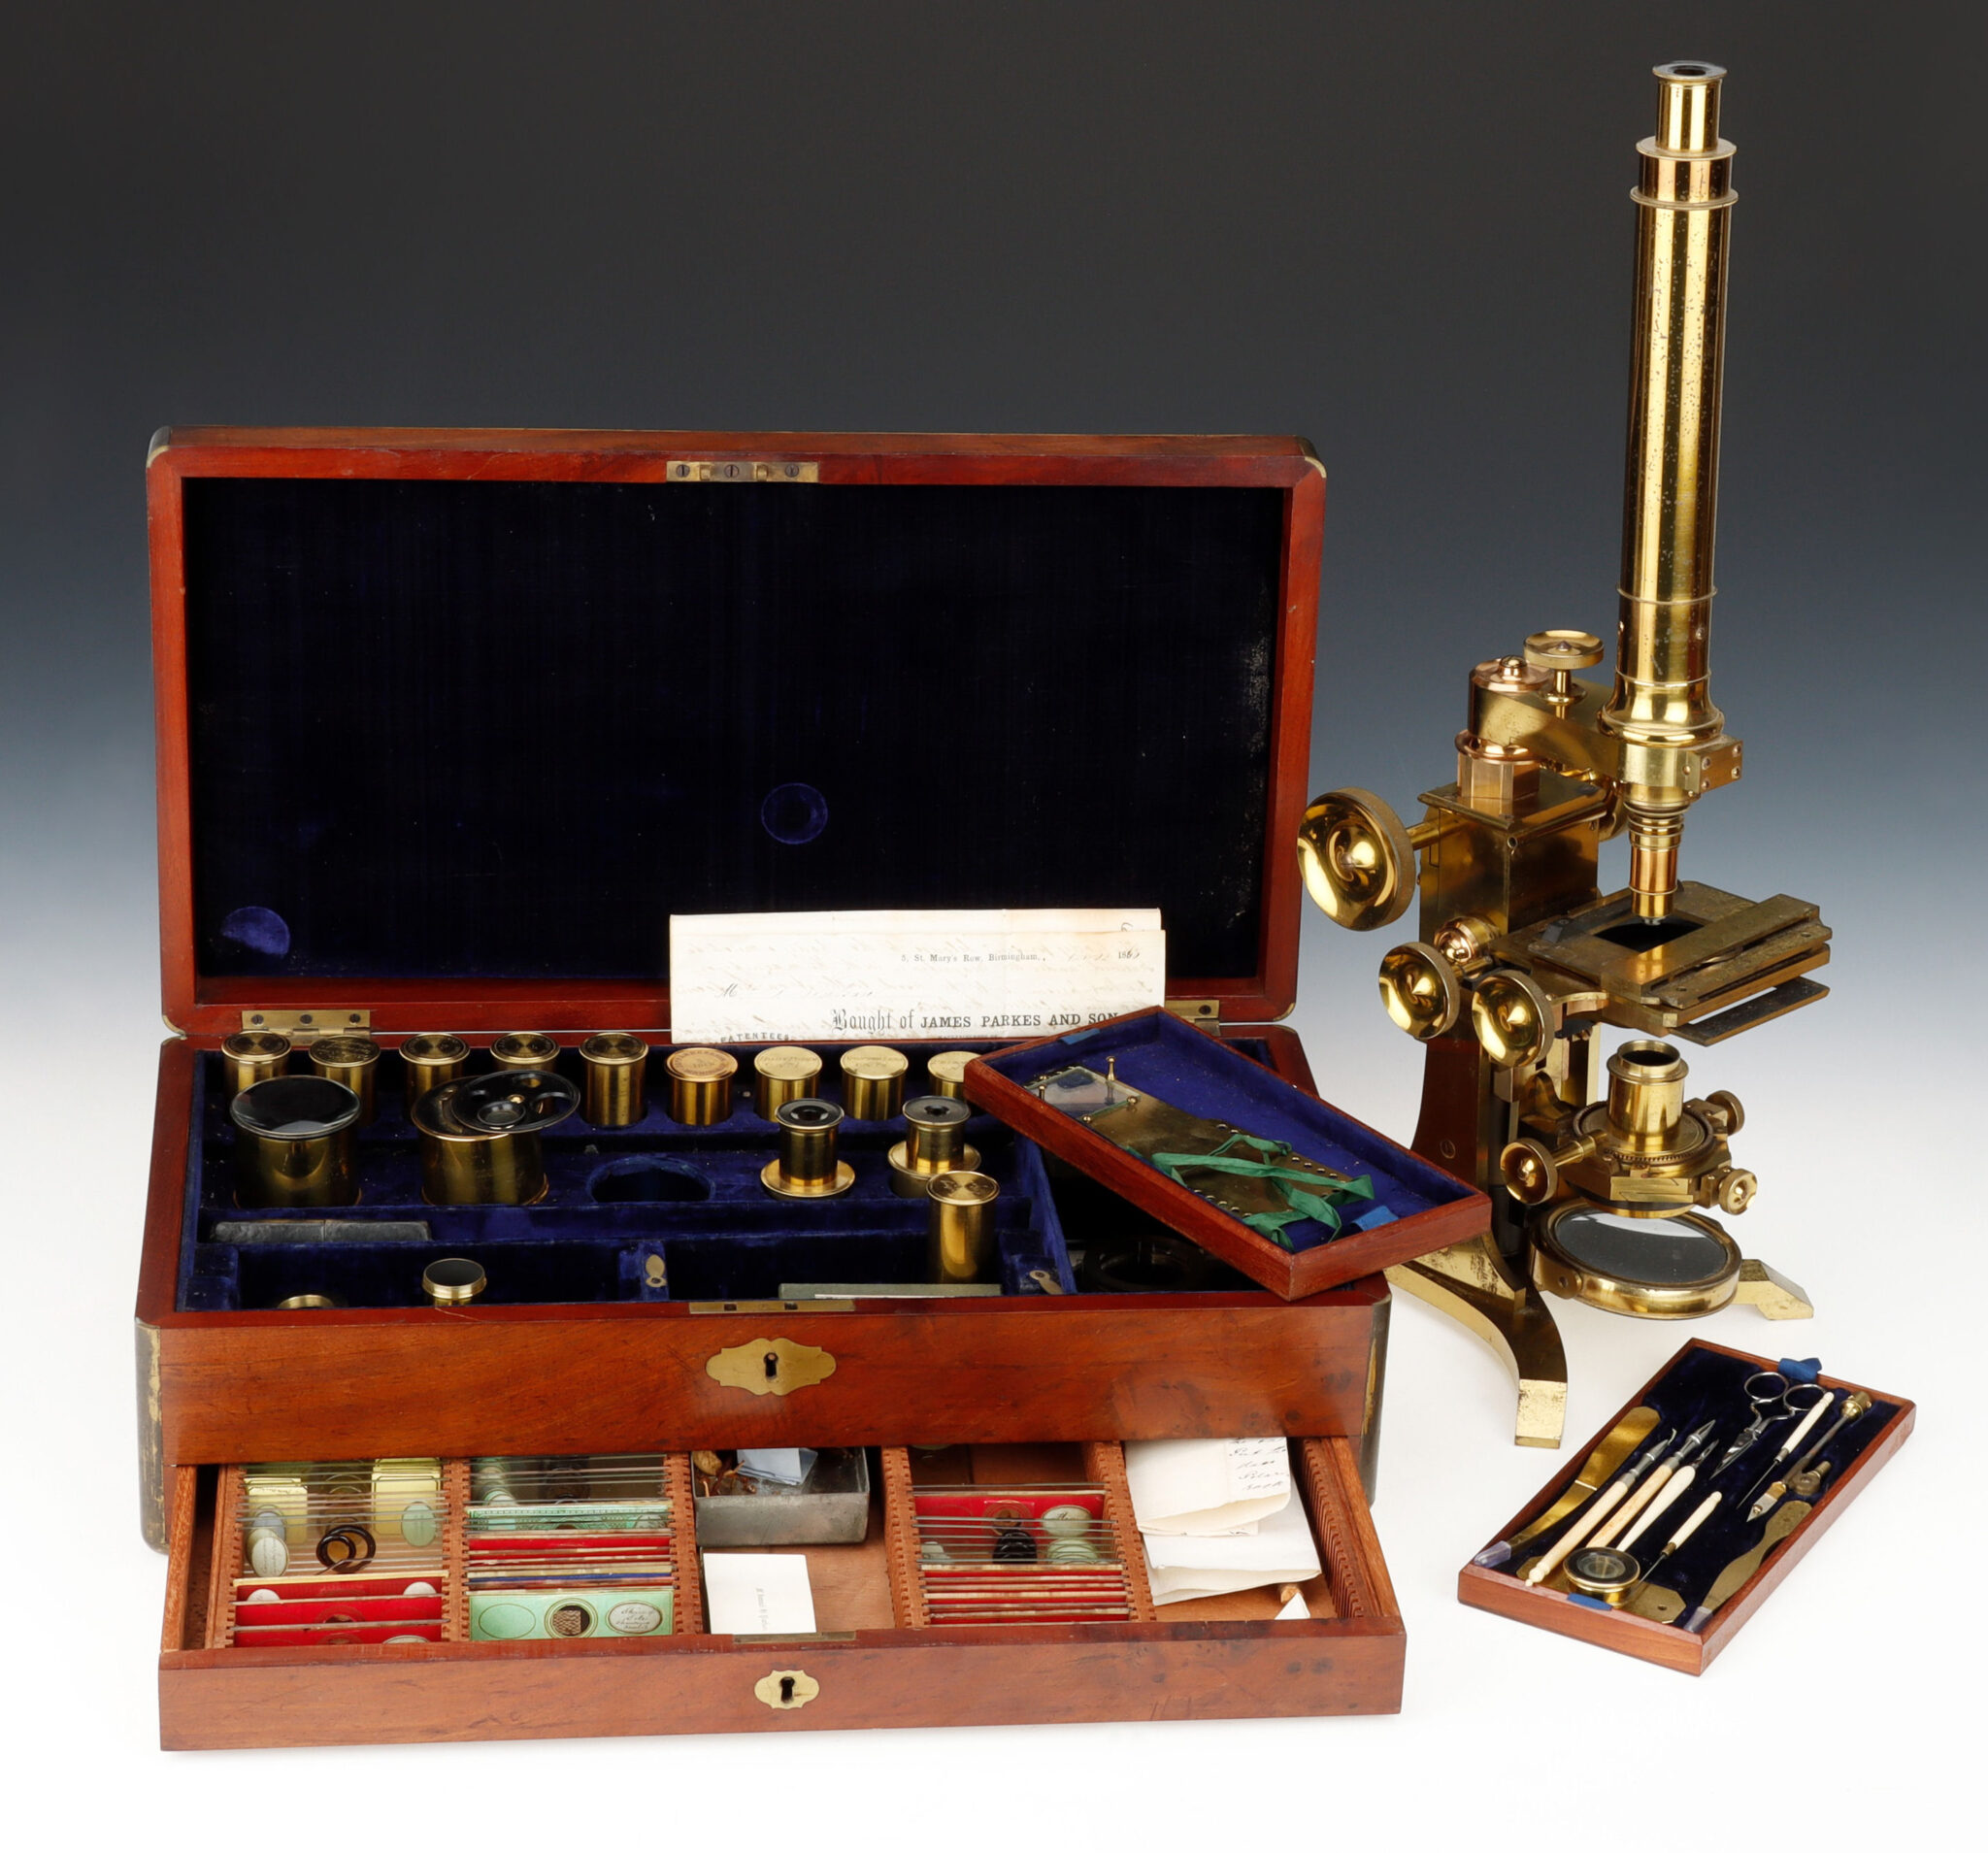 SOLD – Large microscope and accessories – James Parkes & Son.